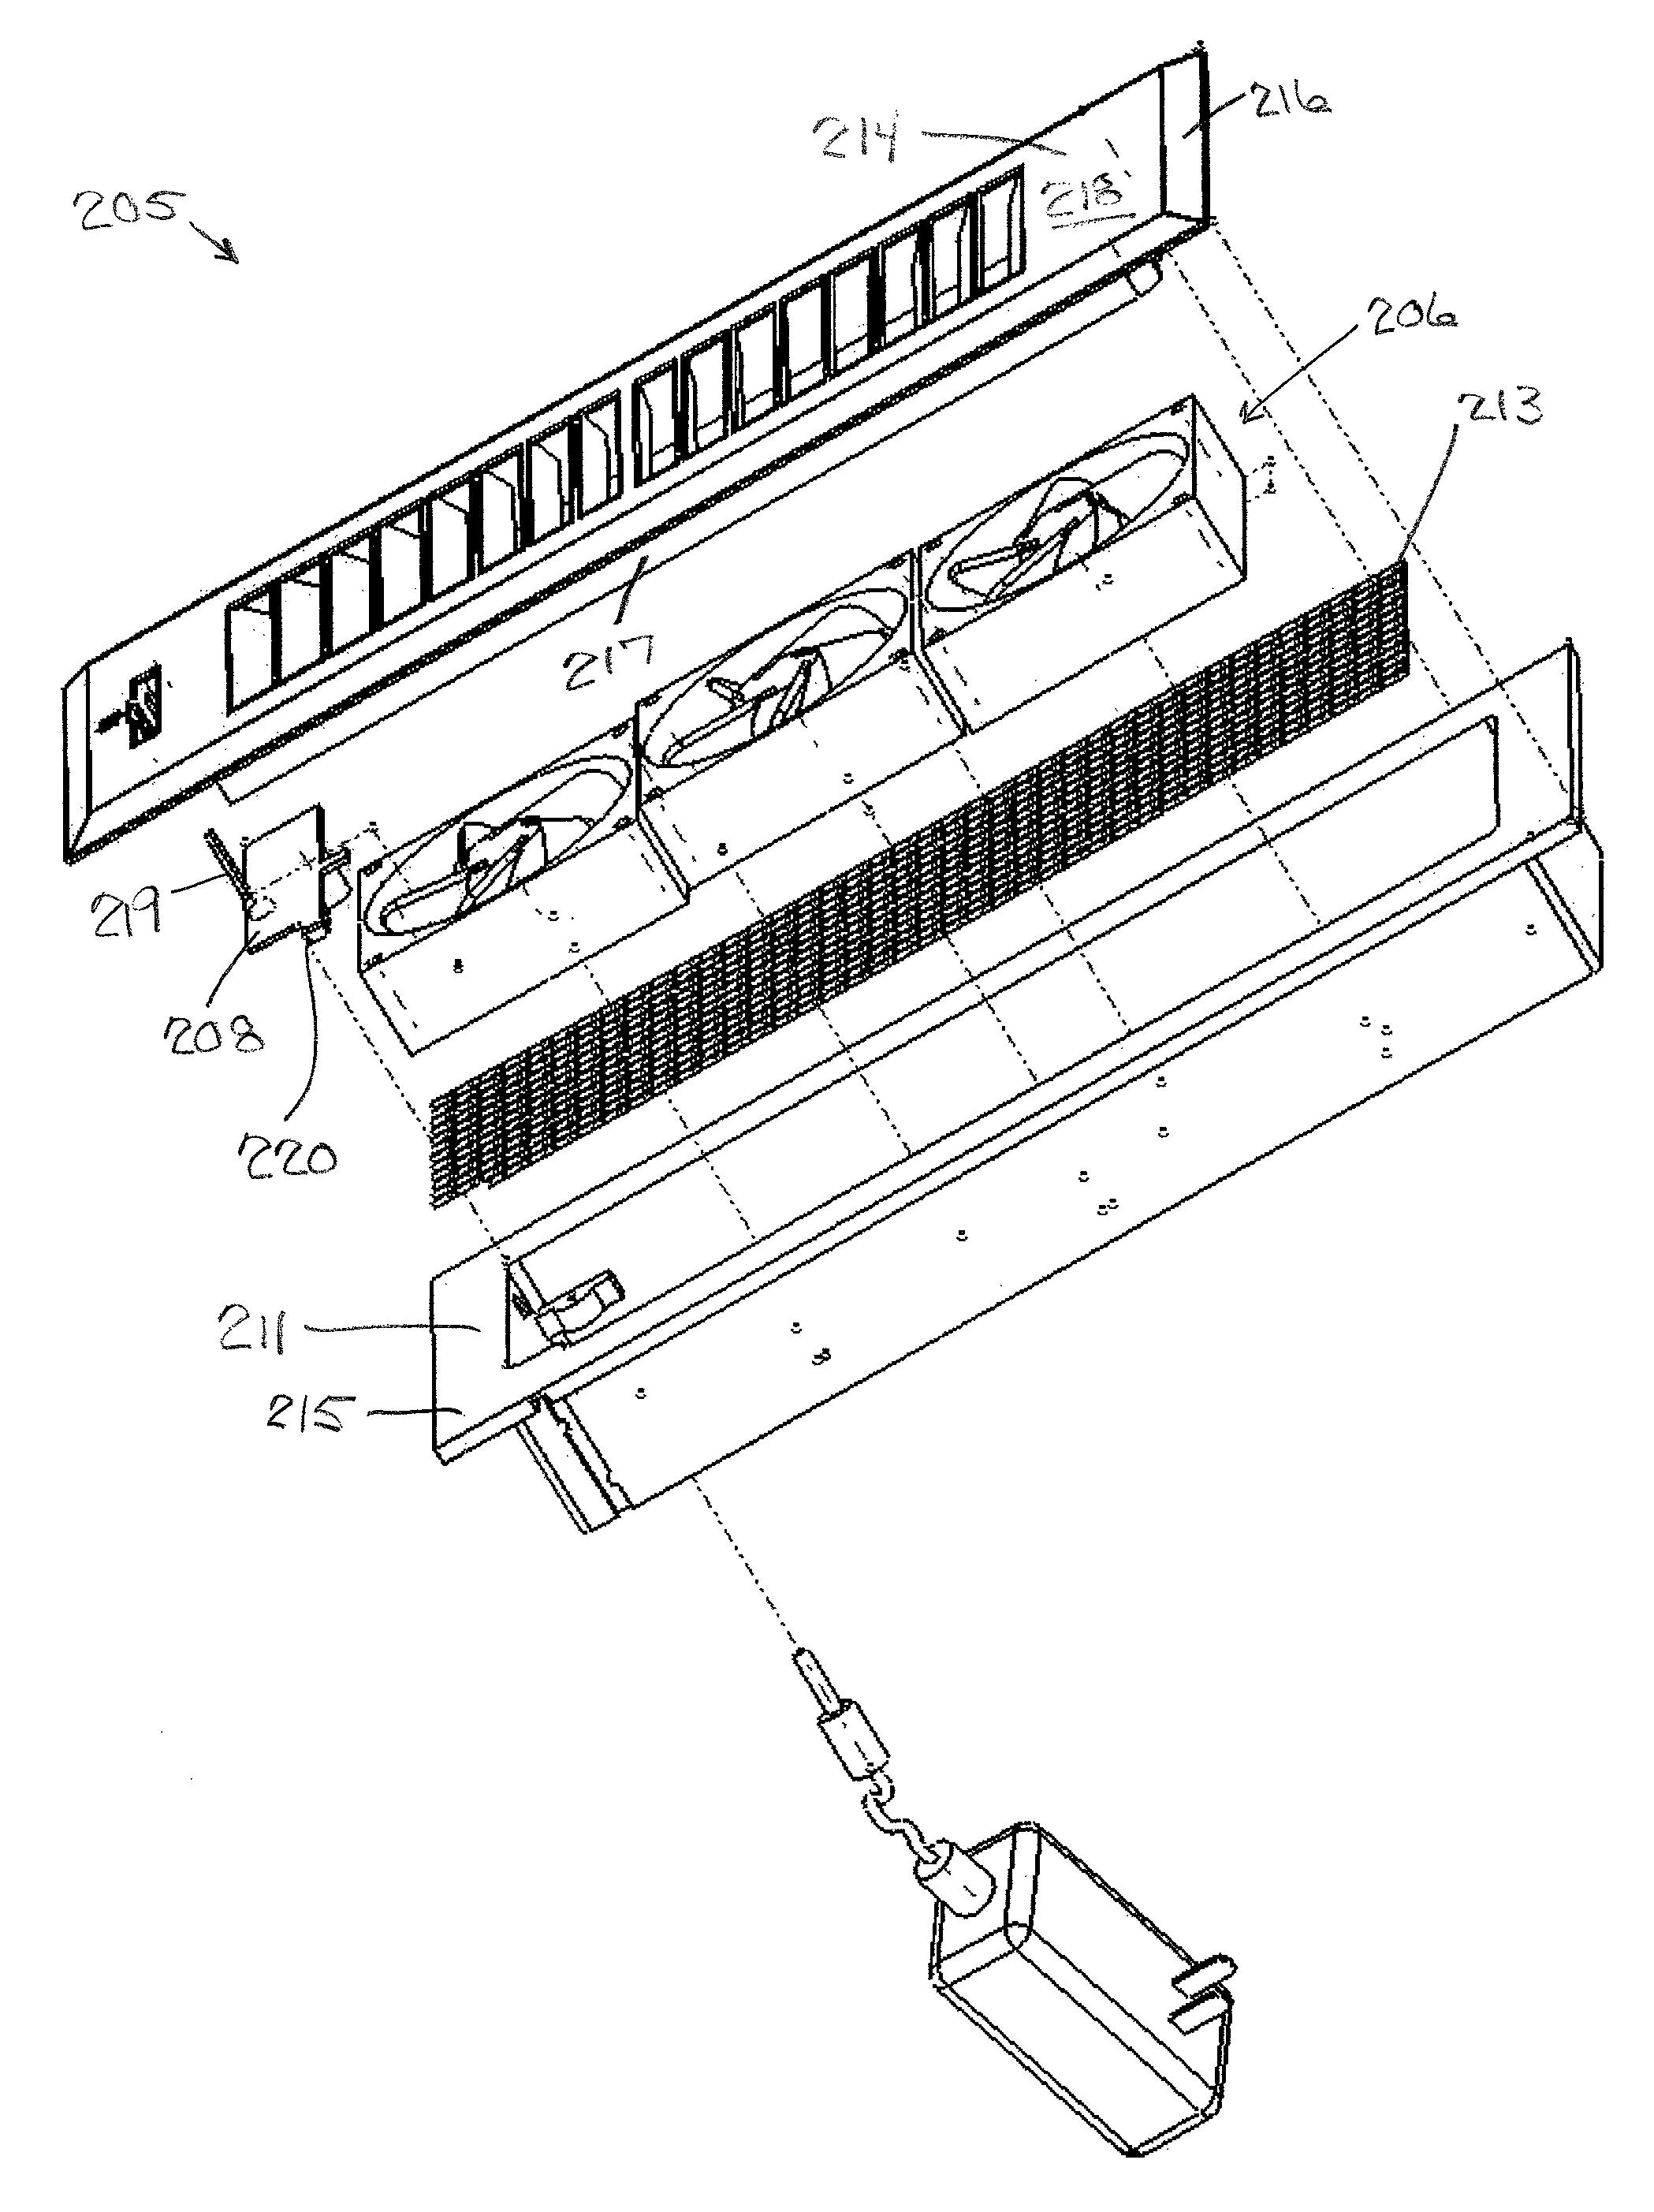 Air-conditioning register assembly and method